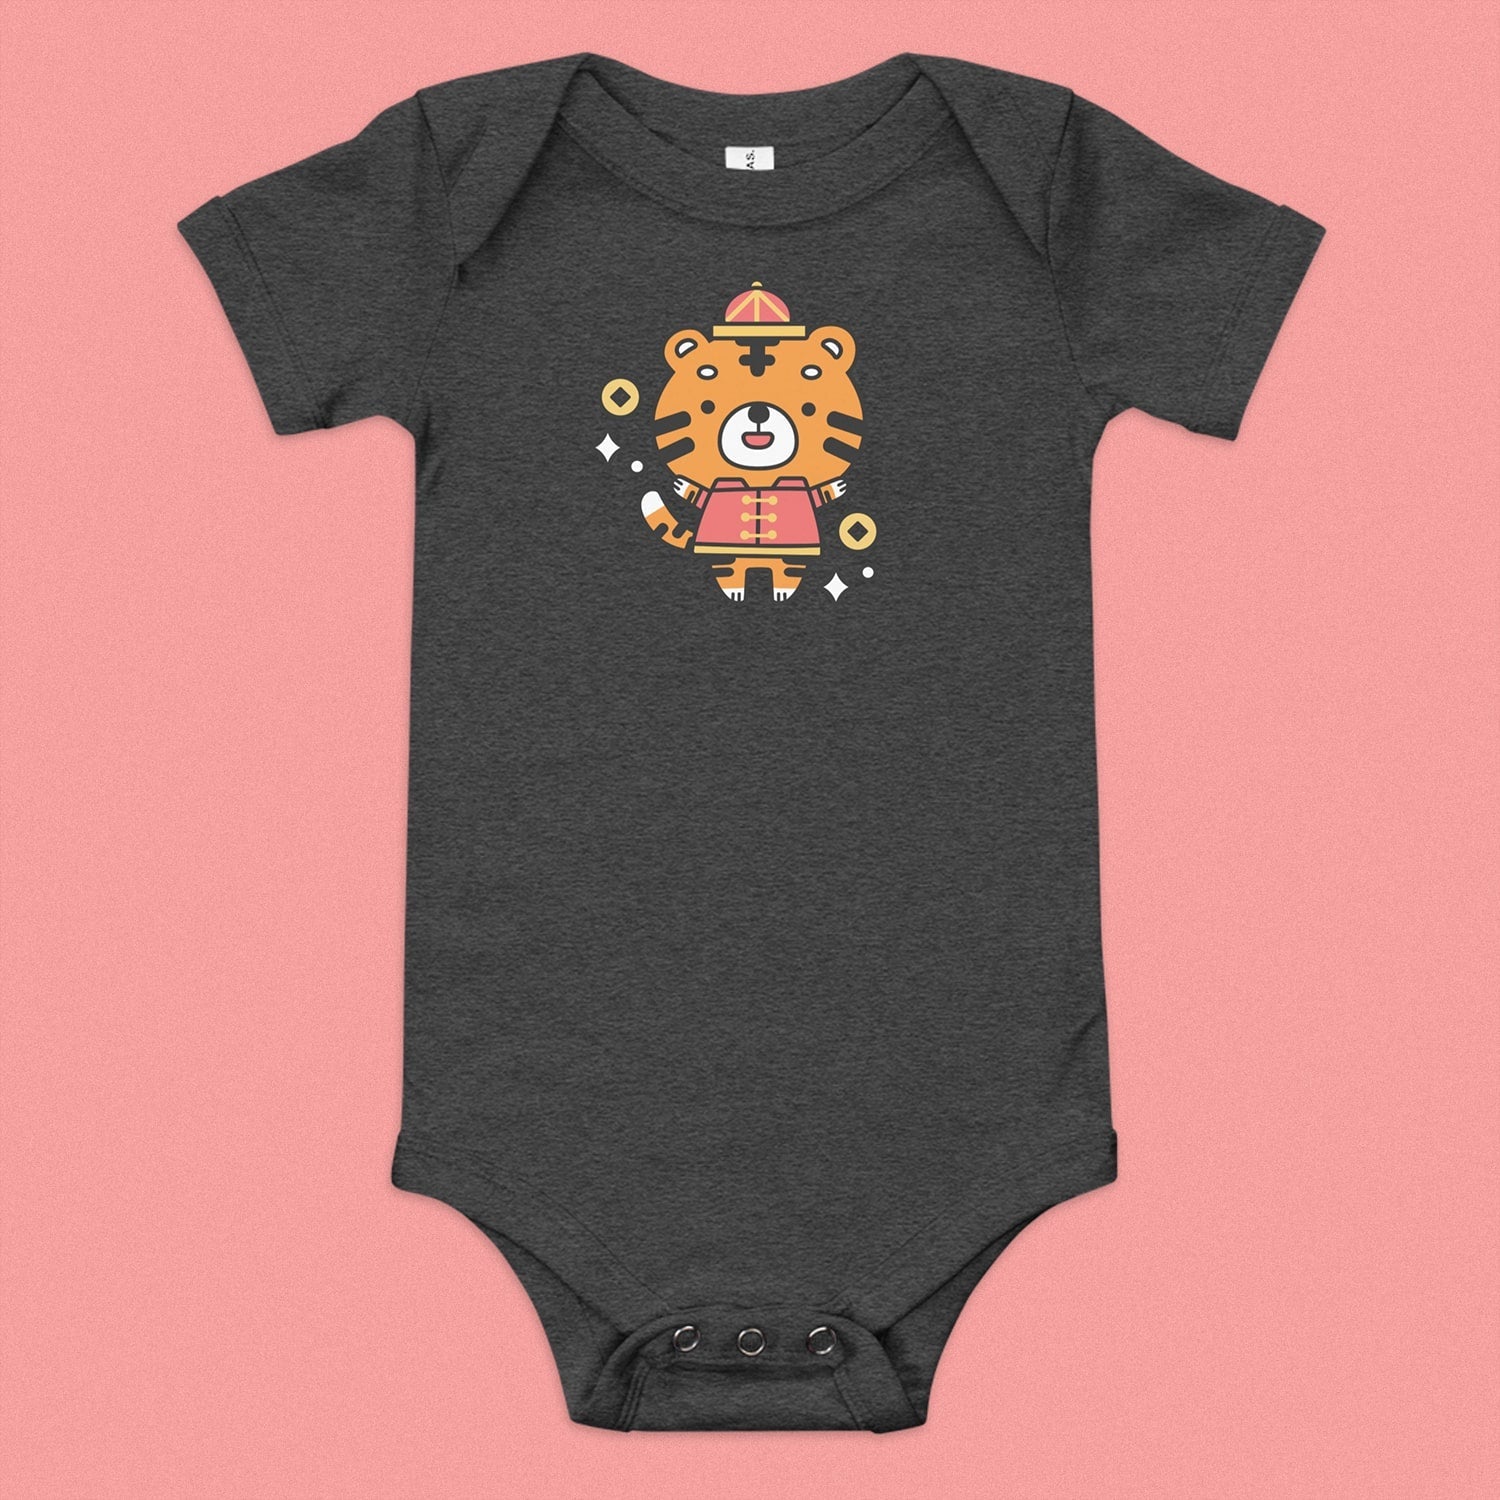 Year of the Tiger Baby Onesie - Ni De Mama Chinese Clothing